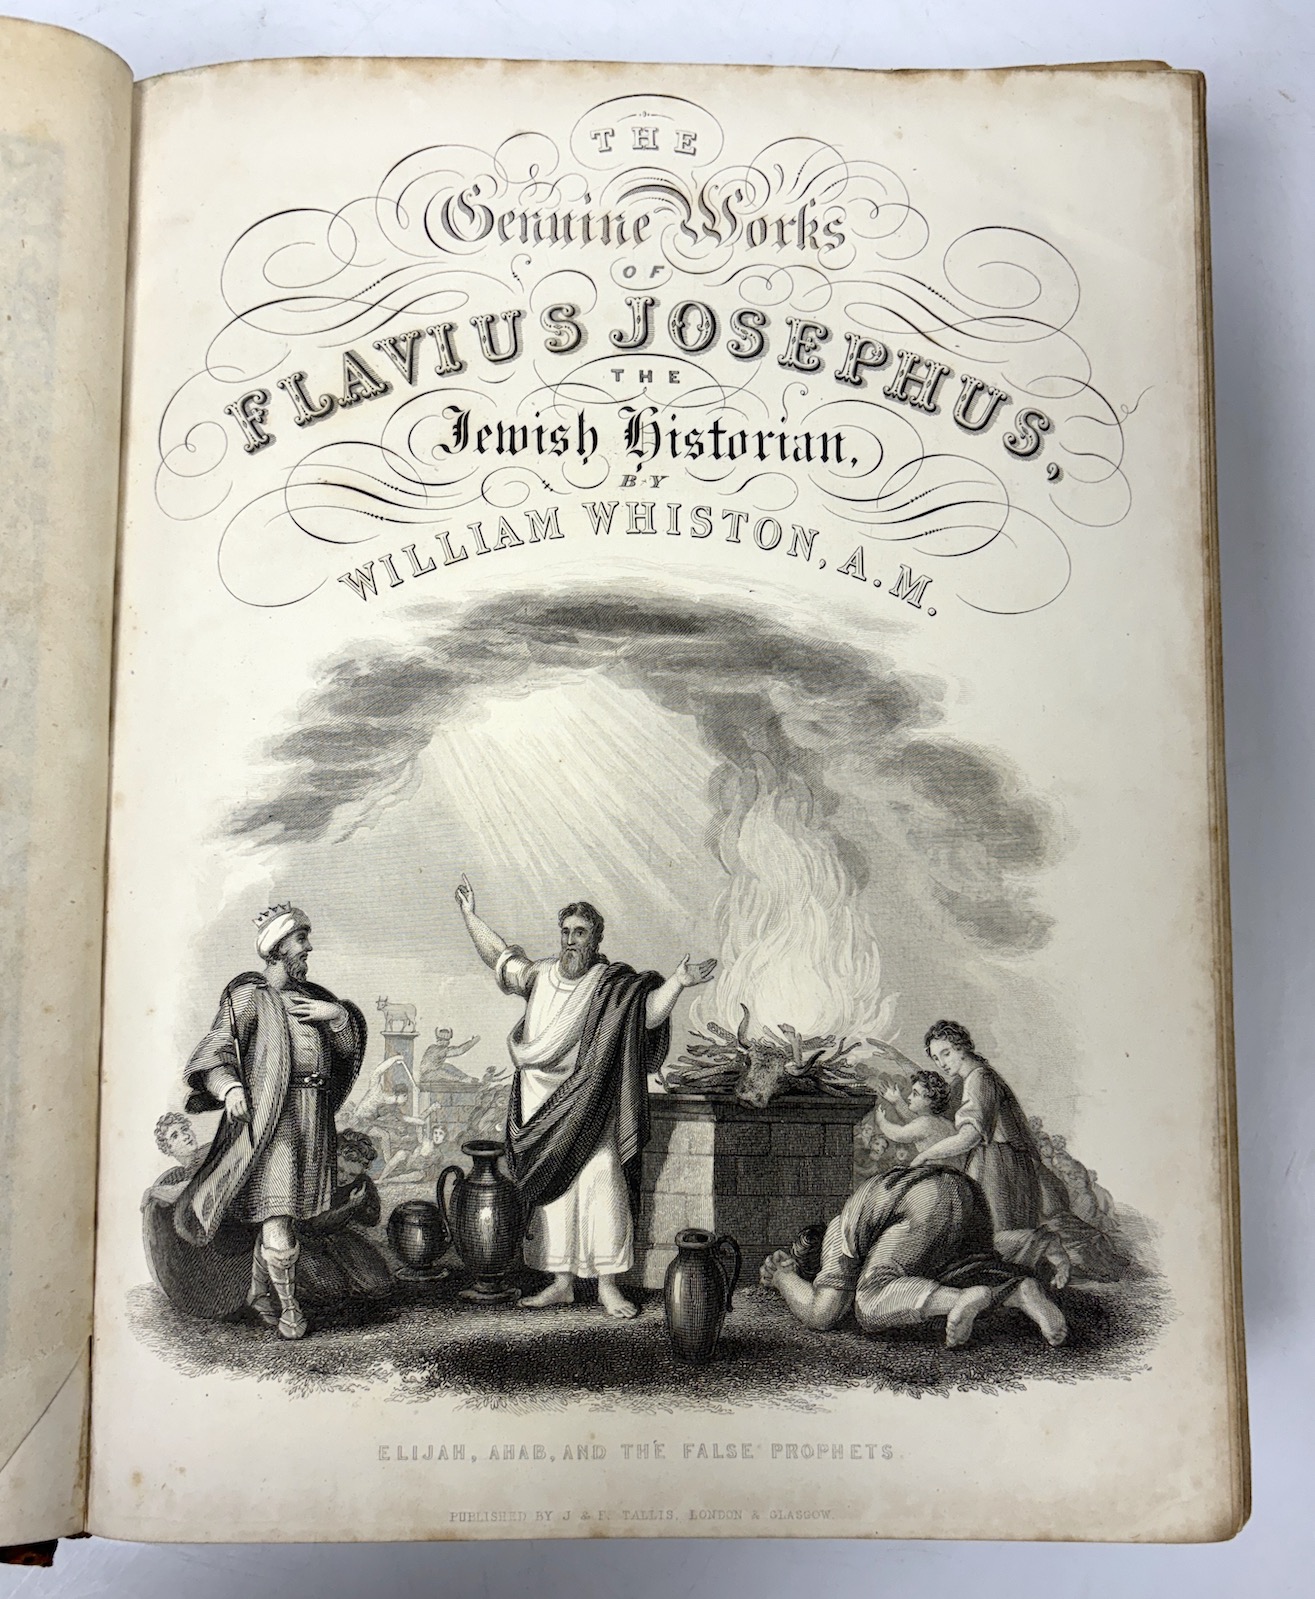 William Whiston, Works of Flavius Josephus, printed and published by John Tallis and Company, London and New York